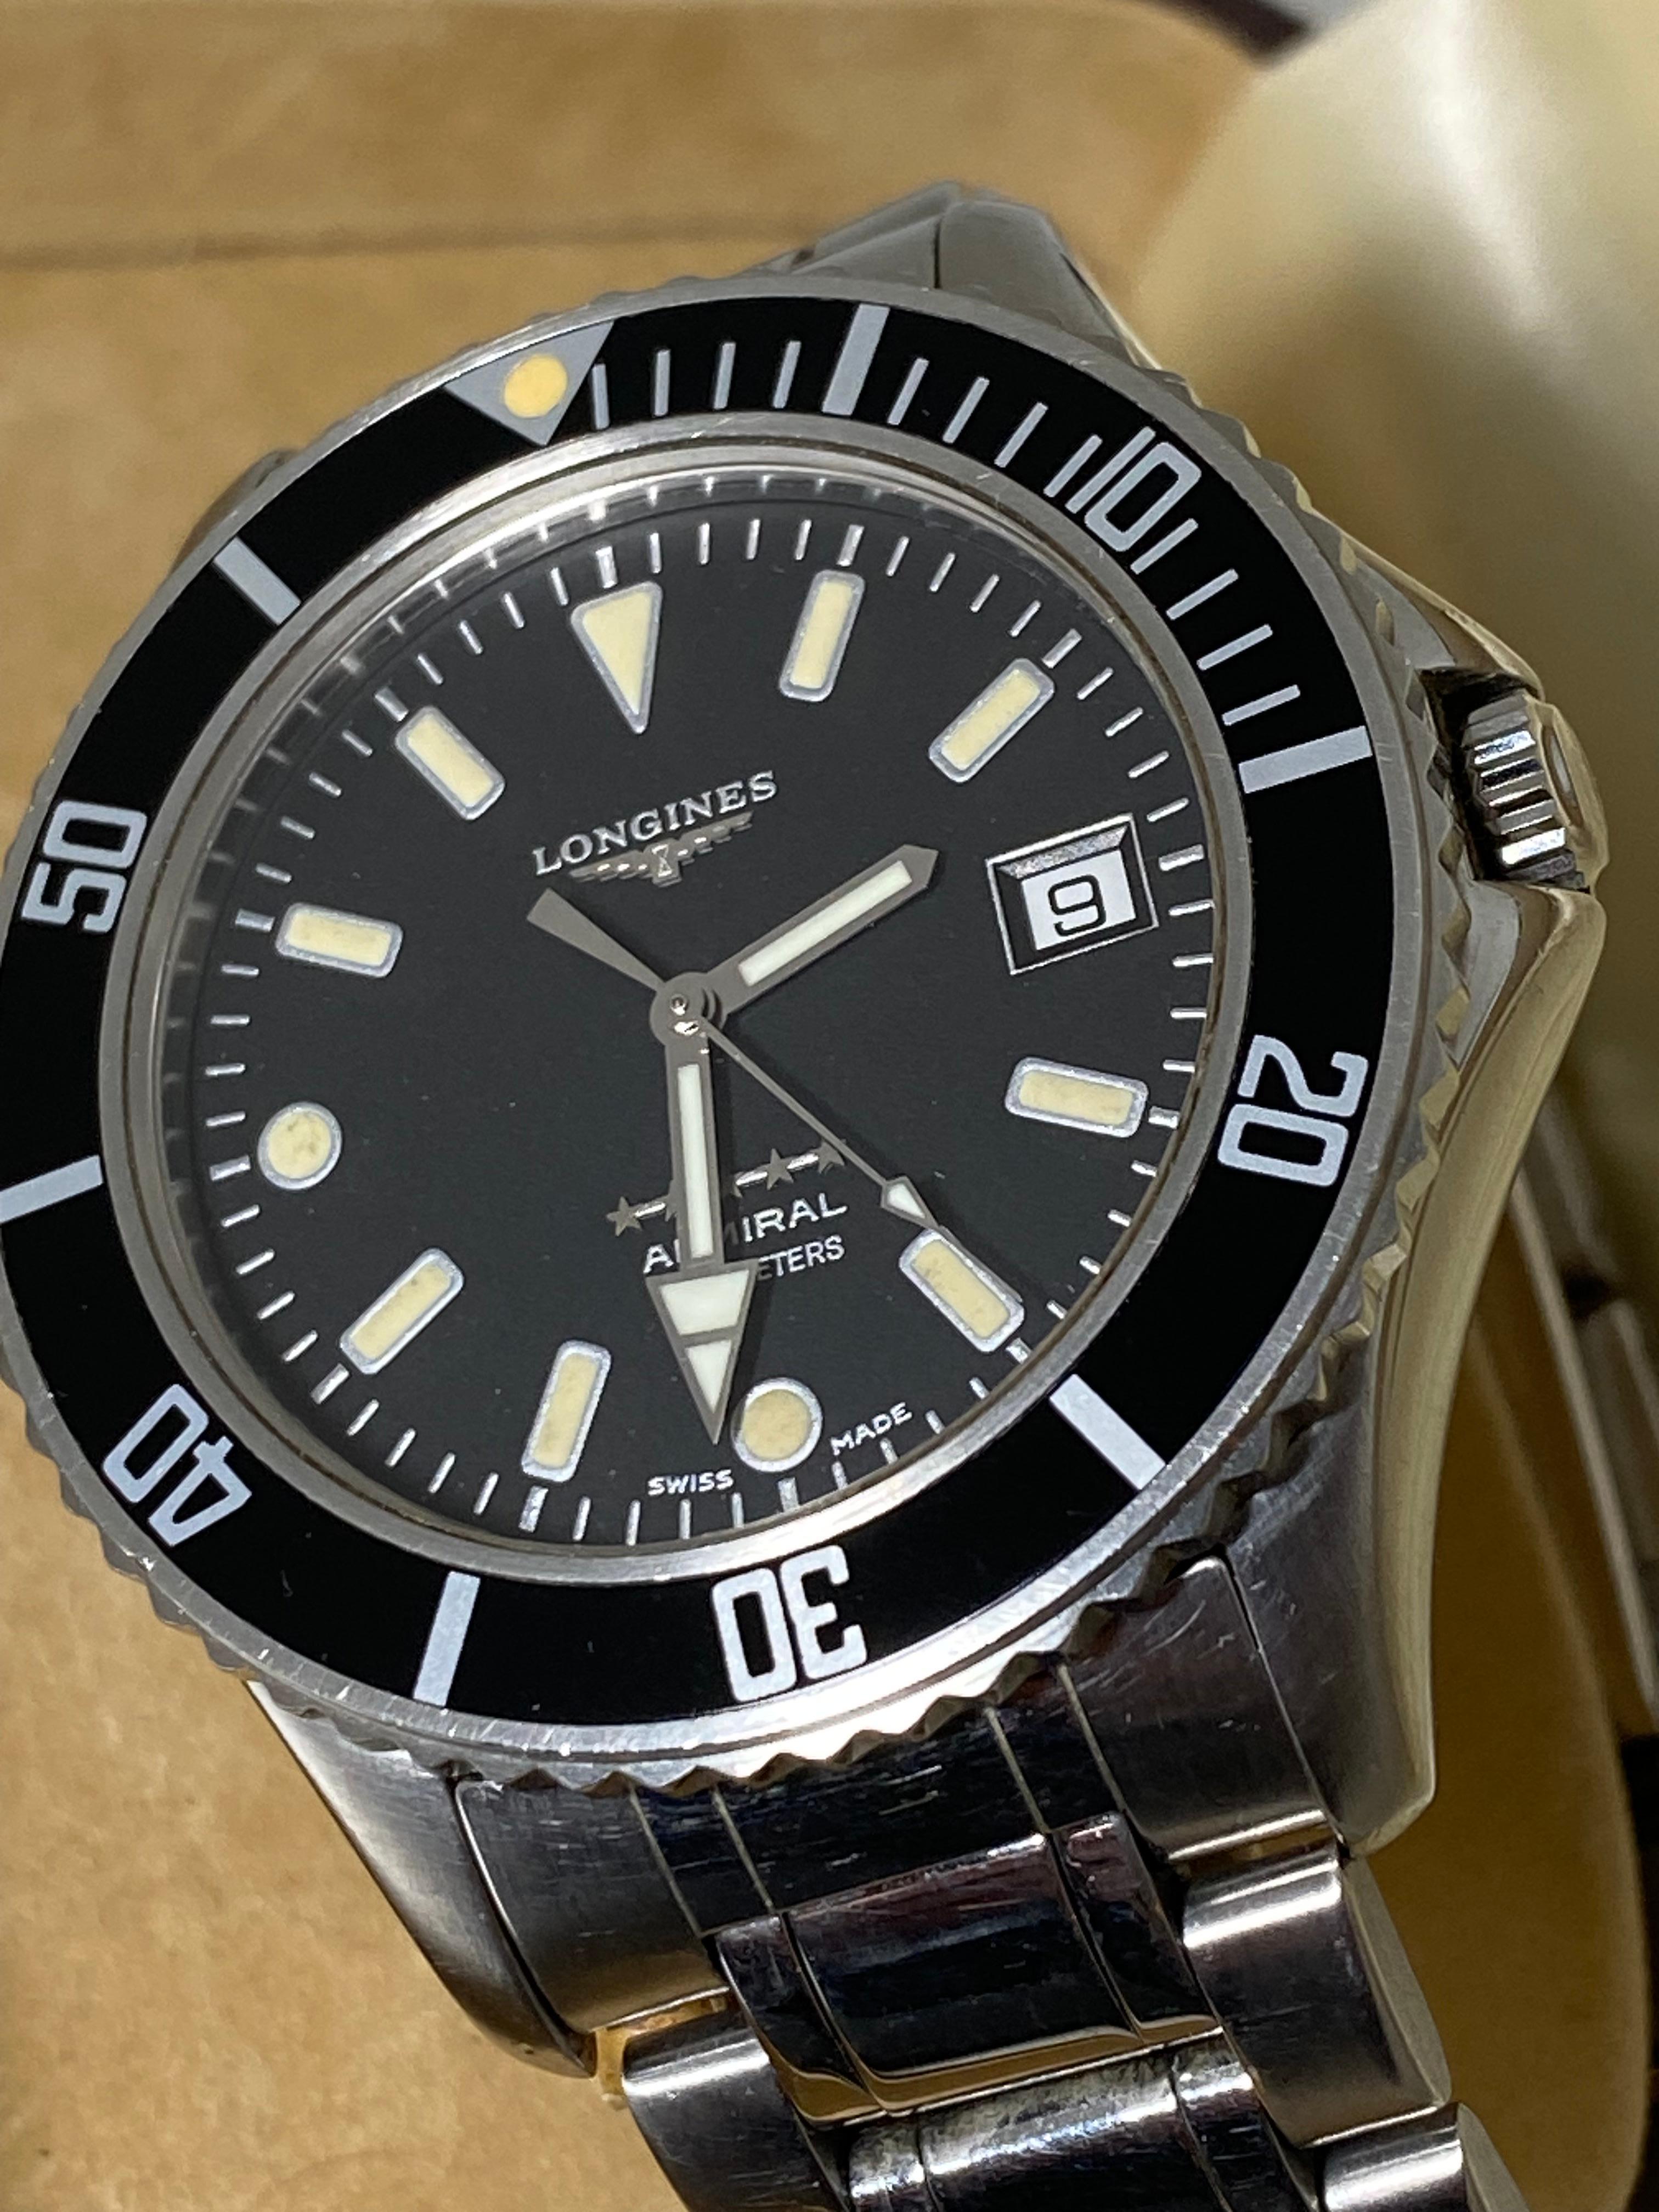 Performed in Stainless Steel, 
this sophisticated timepiece 
by Longines ref 7463
dates back to 1990's

It's been looked after very well since then,
which is reflected it its current mint condition 

~~~

The s/steel case is perfectly proportioned,